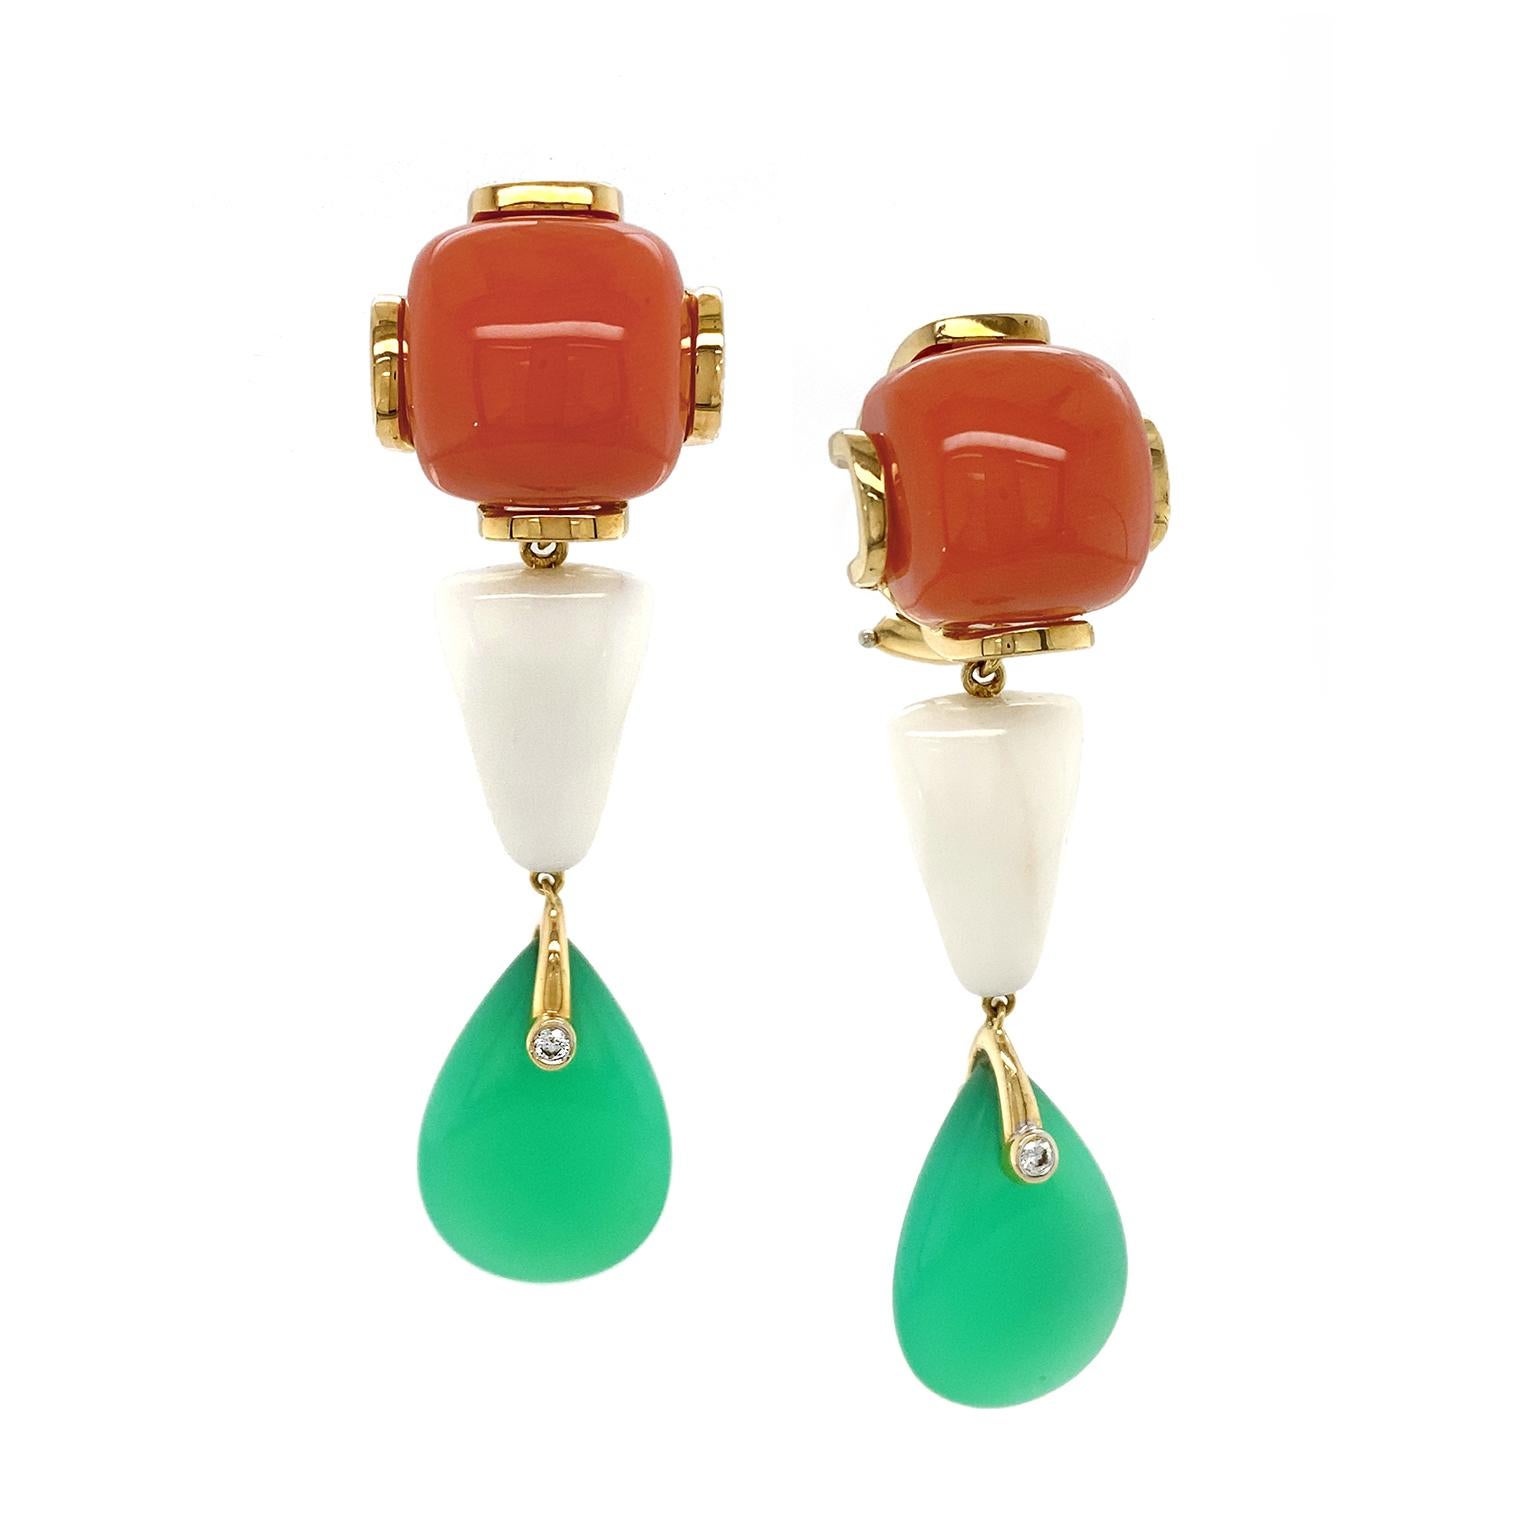 Complementary colors and shapes create a striking effect for these drop earrings. The pattern begins with a cabochon cut of fiery red coral, which is secured by 18k yellow gold bars. Suspending below is a tapered trapezoid cut of white coral,